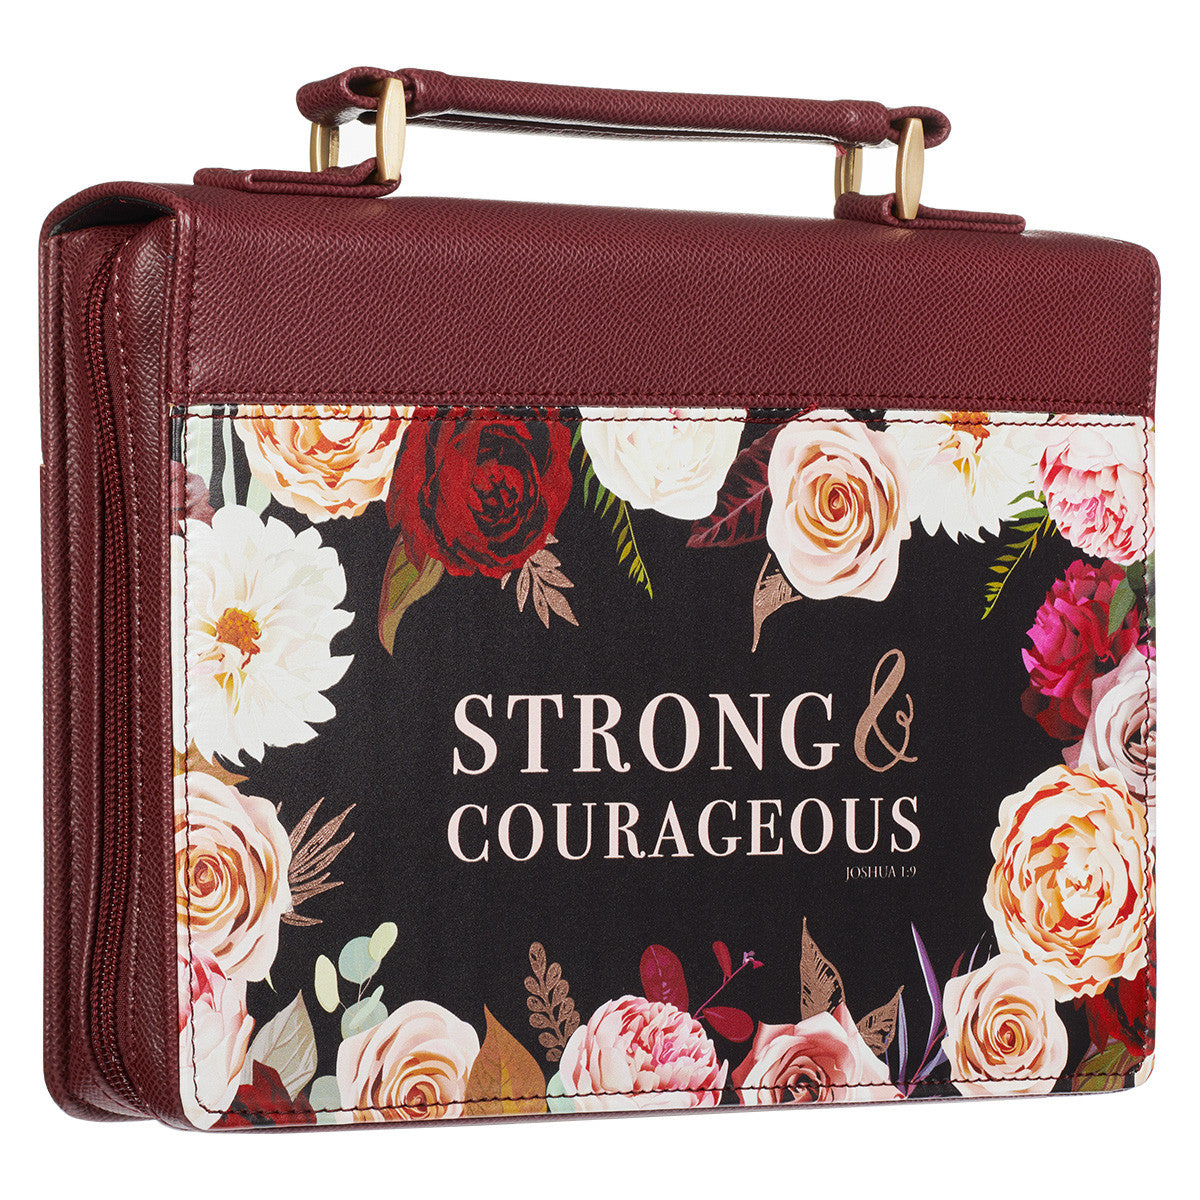 Strong and Courageous Merlot Bouquet Faux Leather Fashion Bible Cover – Joshua 1:9 - The Christian Gift Company